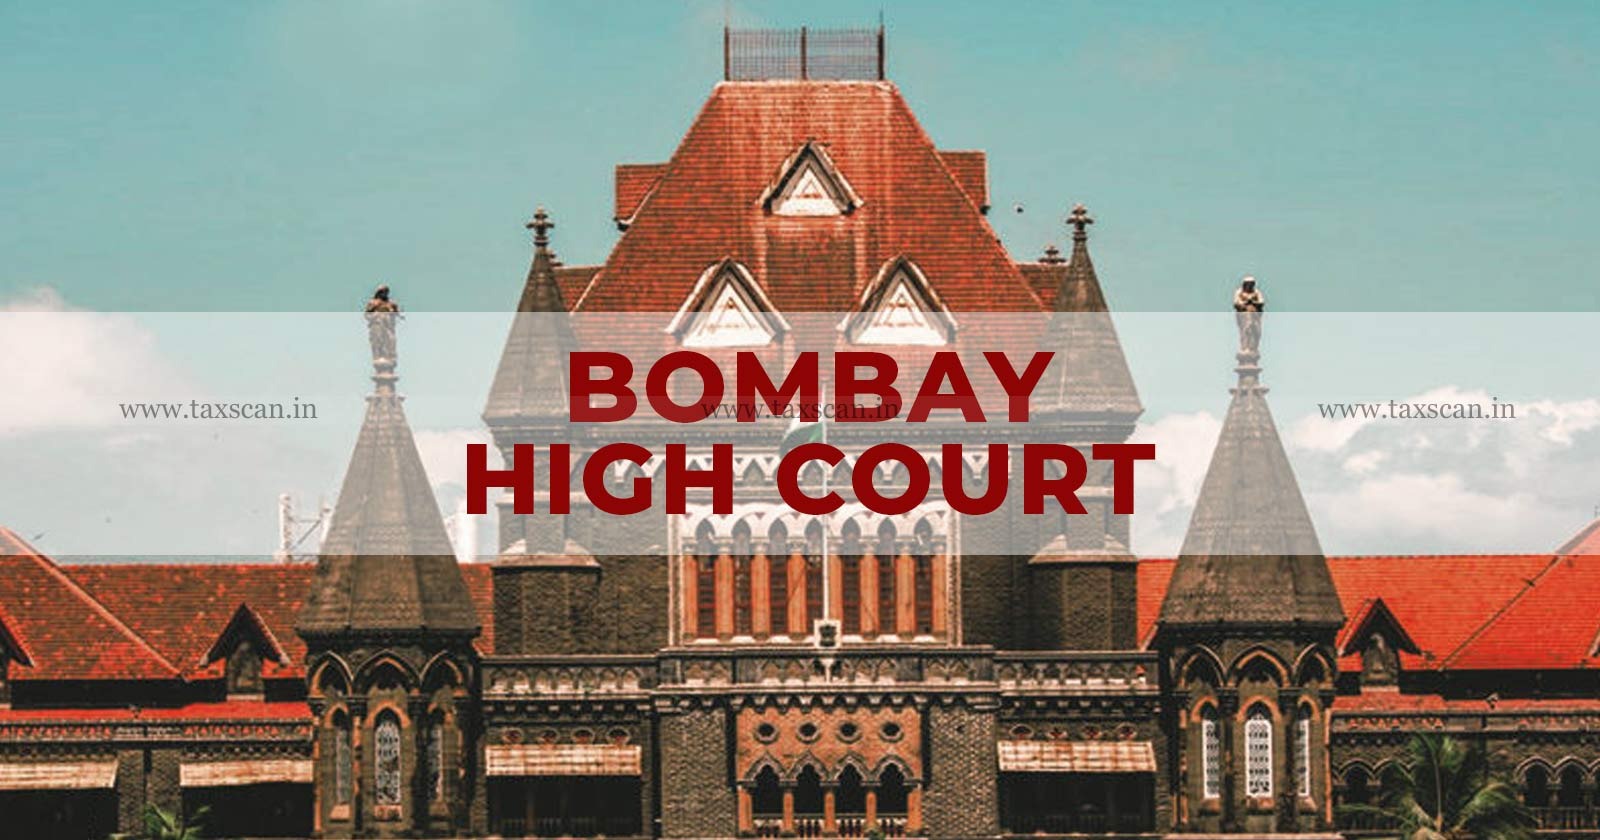 Issuance of Reassessment - Housewife on Property - purchased by Husband is Invalid - Bombay HC - taxscan